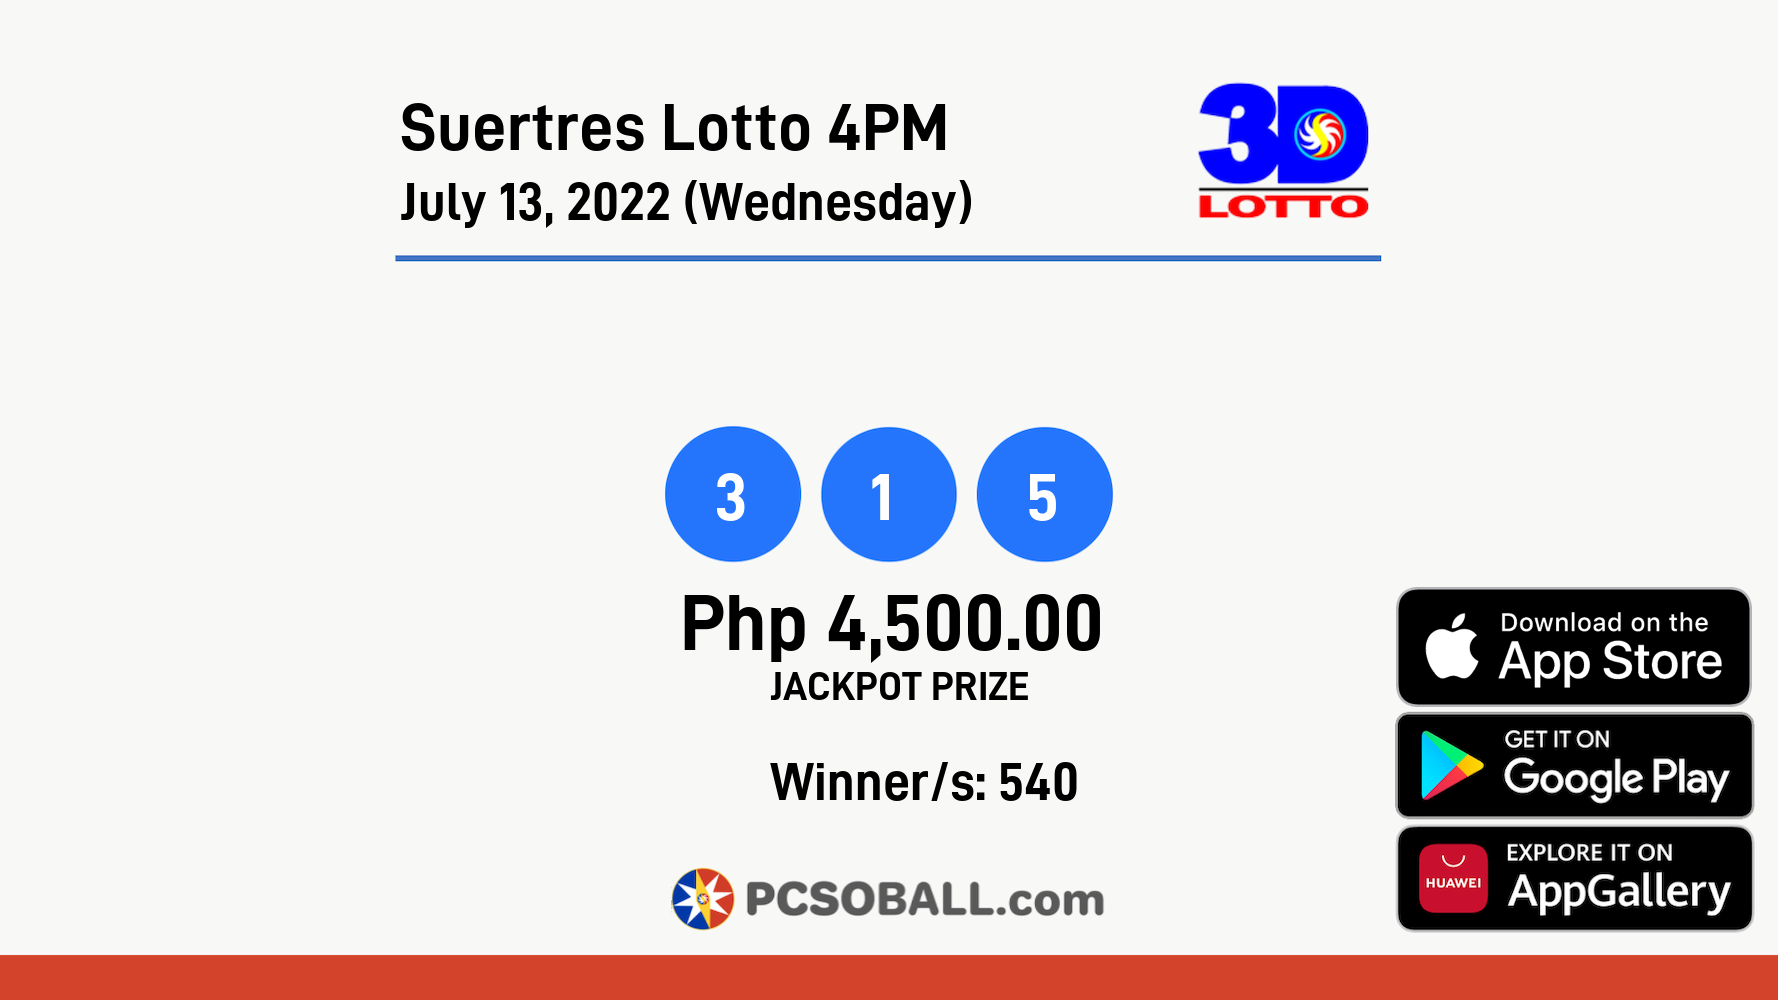 Suertres Lotto 4PM July 13, 2022 (Wednesday) Result